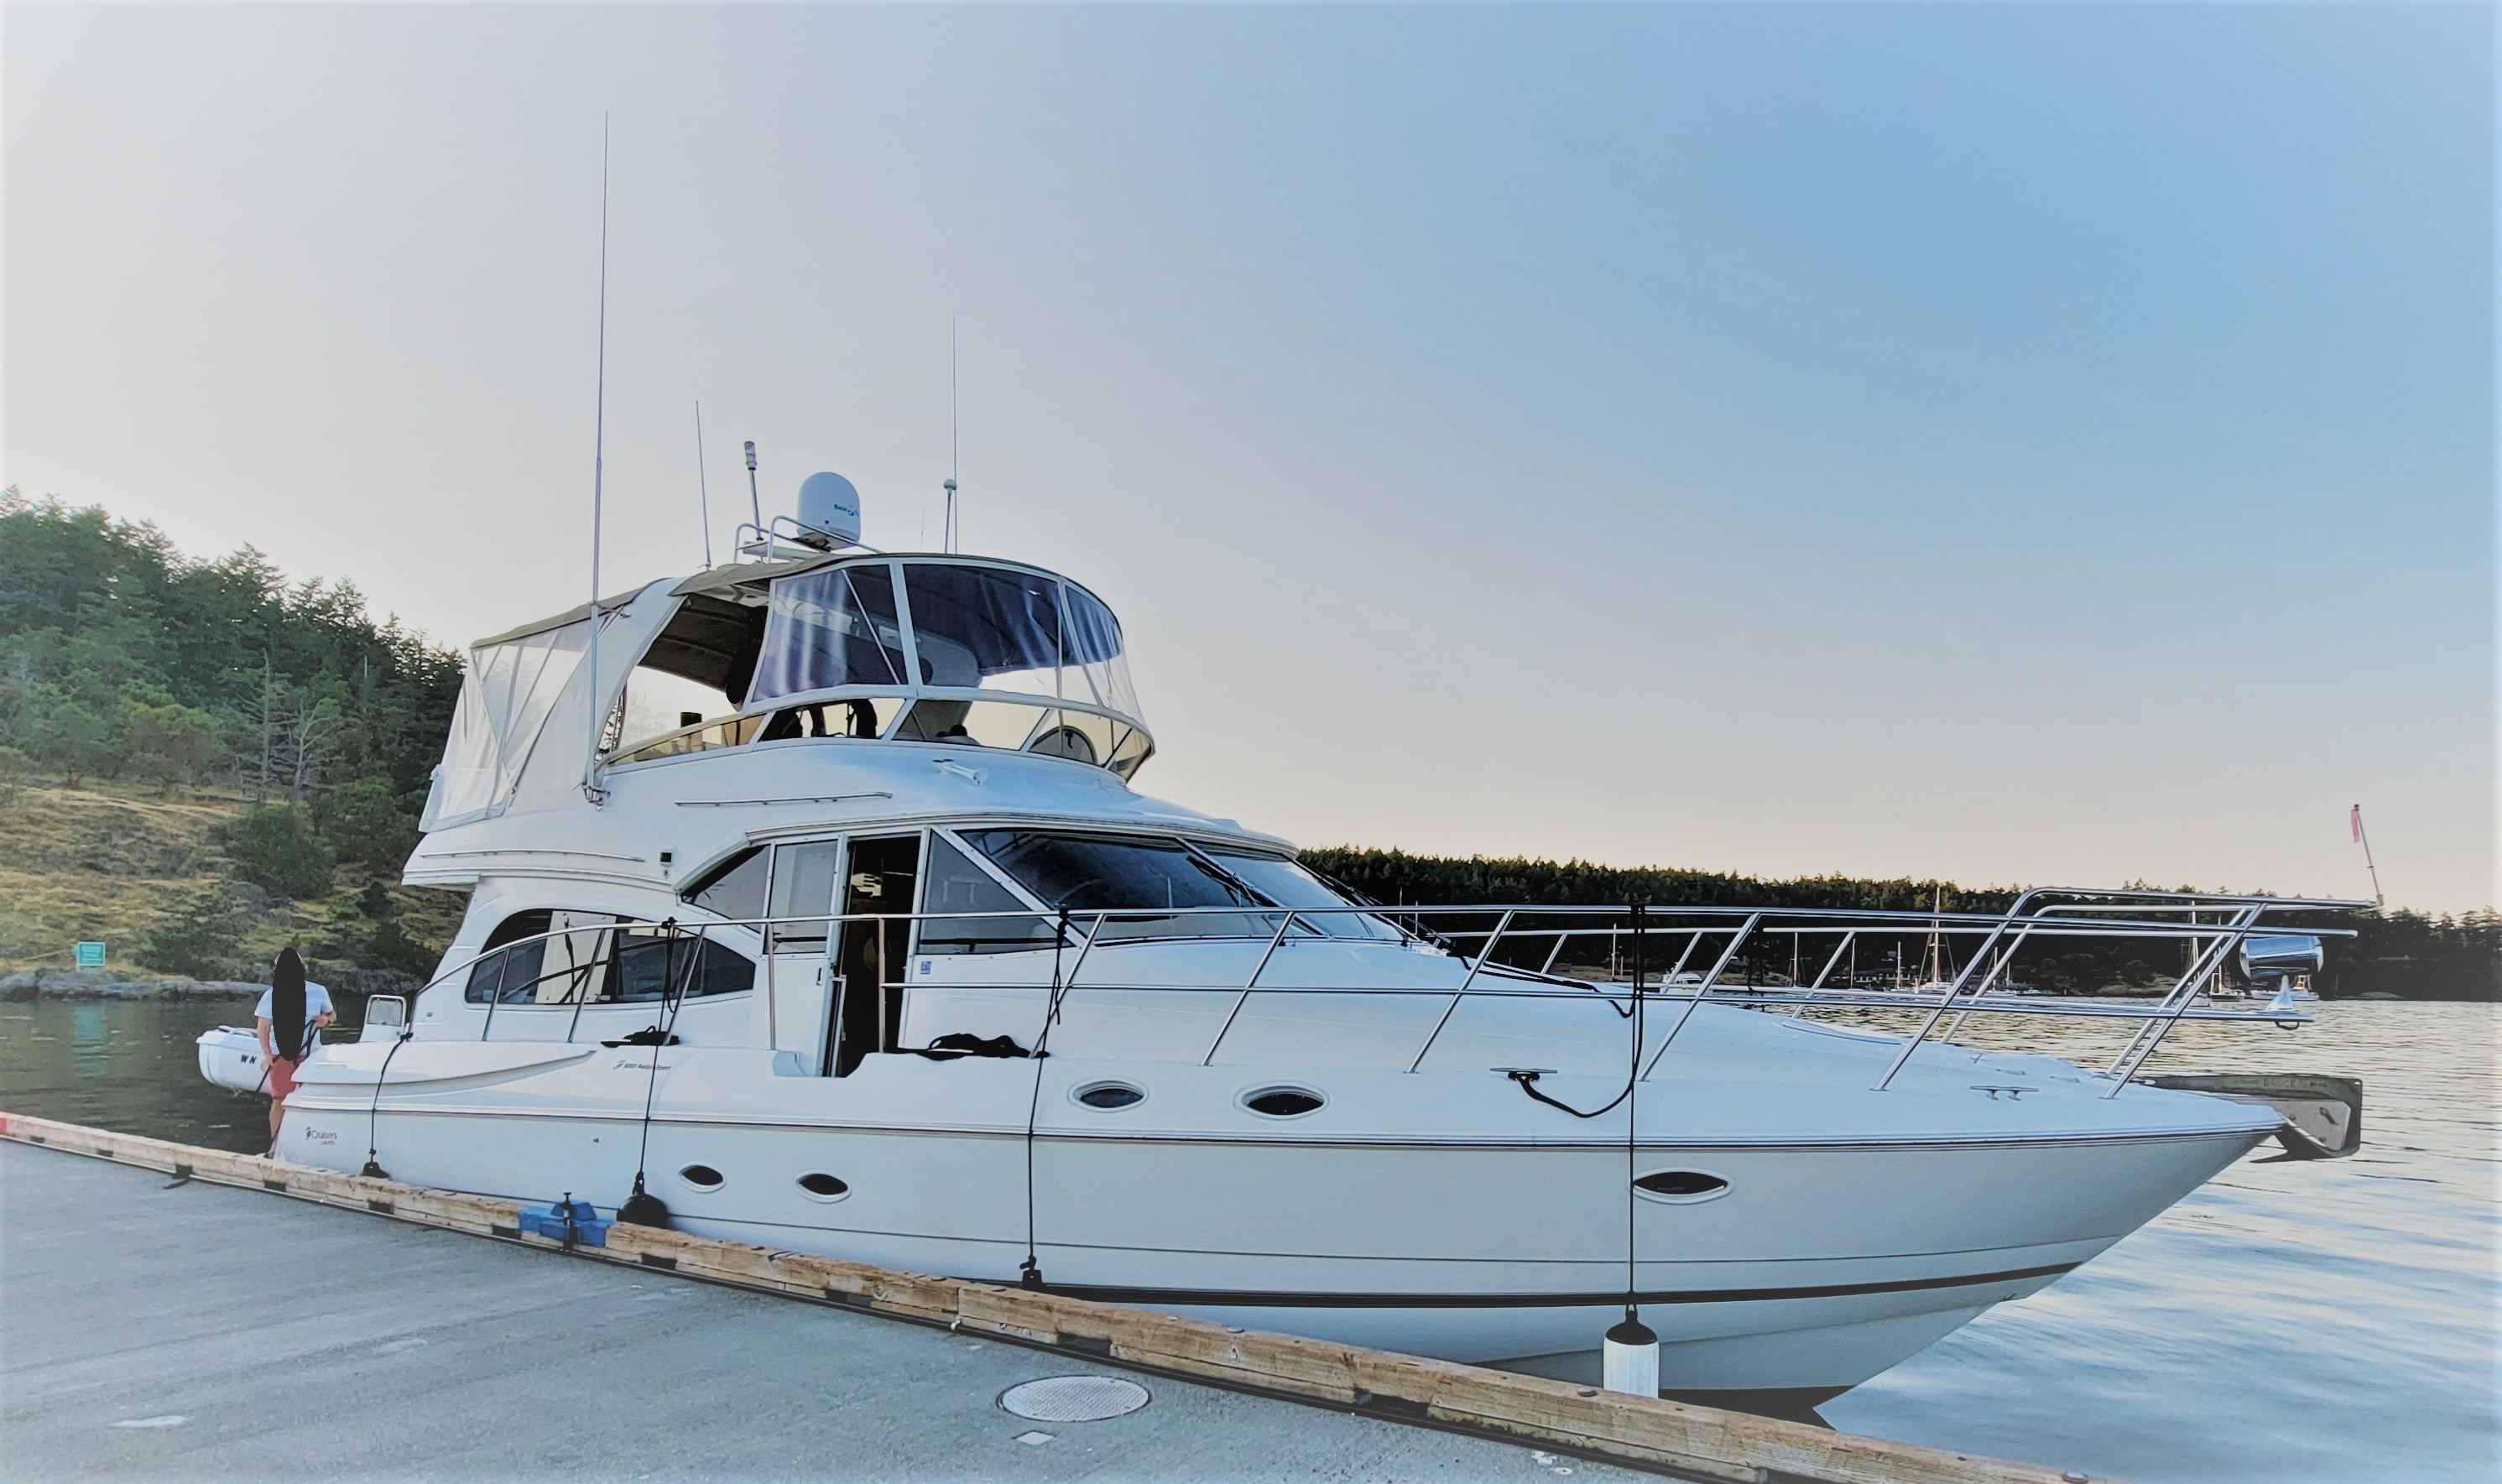 Luxury Affordable boat and Yacht For rentals in Seattle